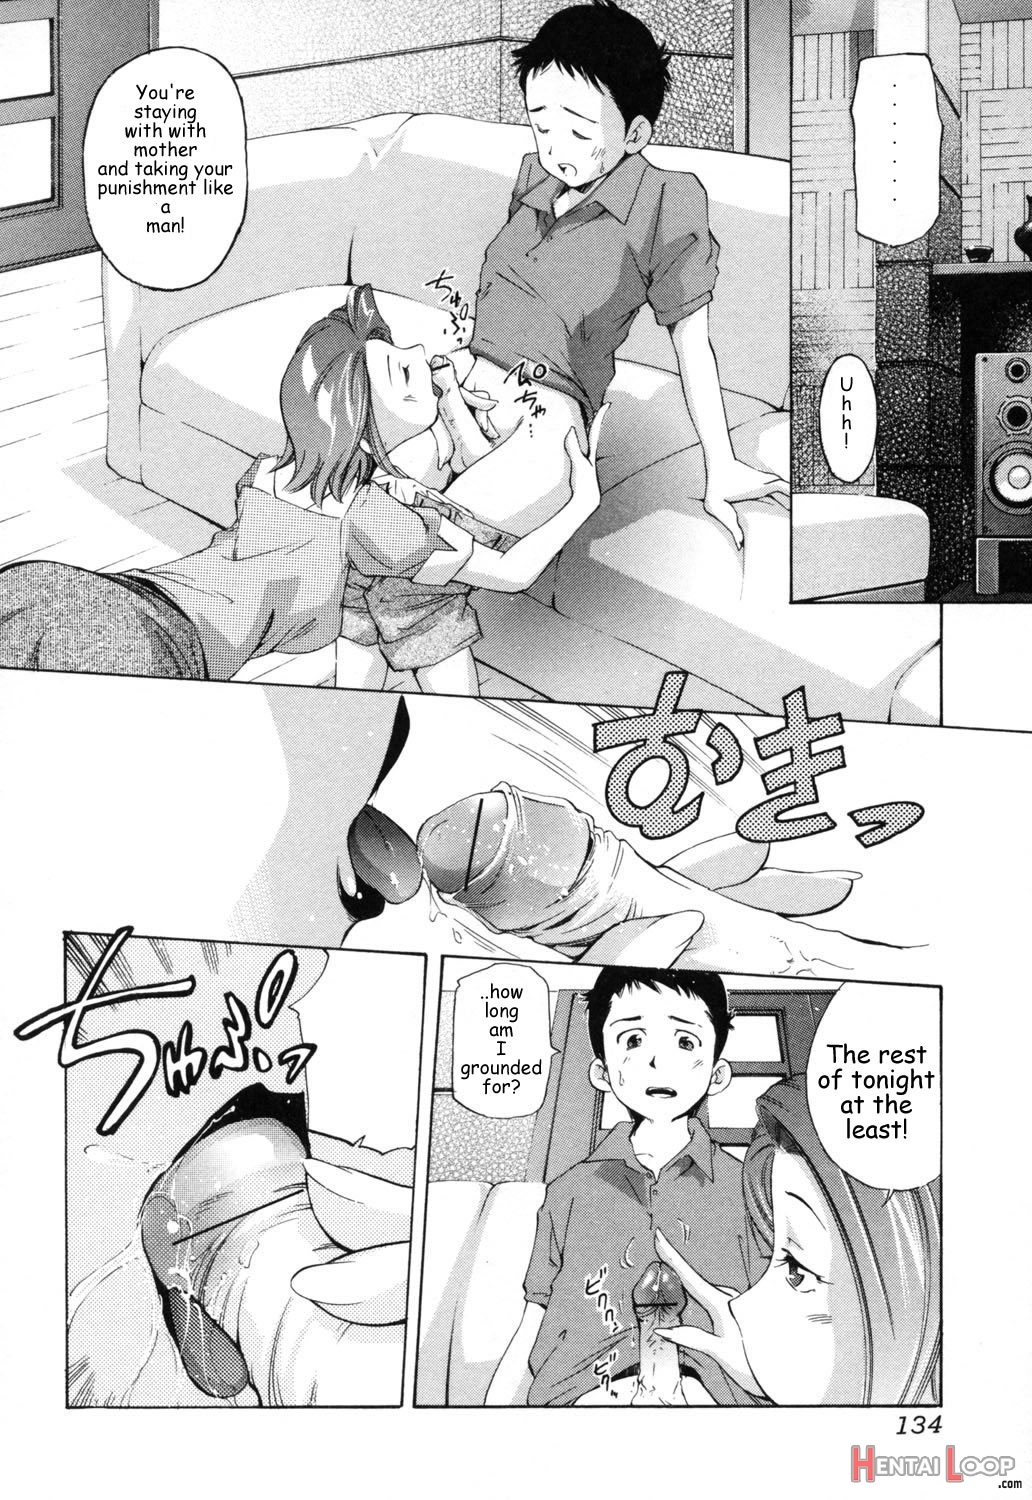 Shitto / Grounded page 4